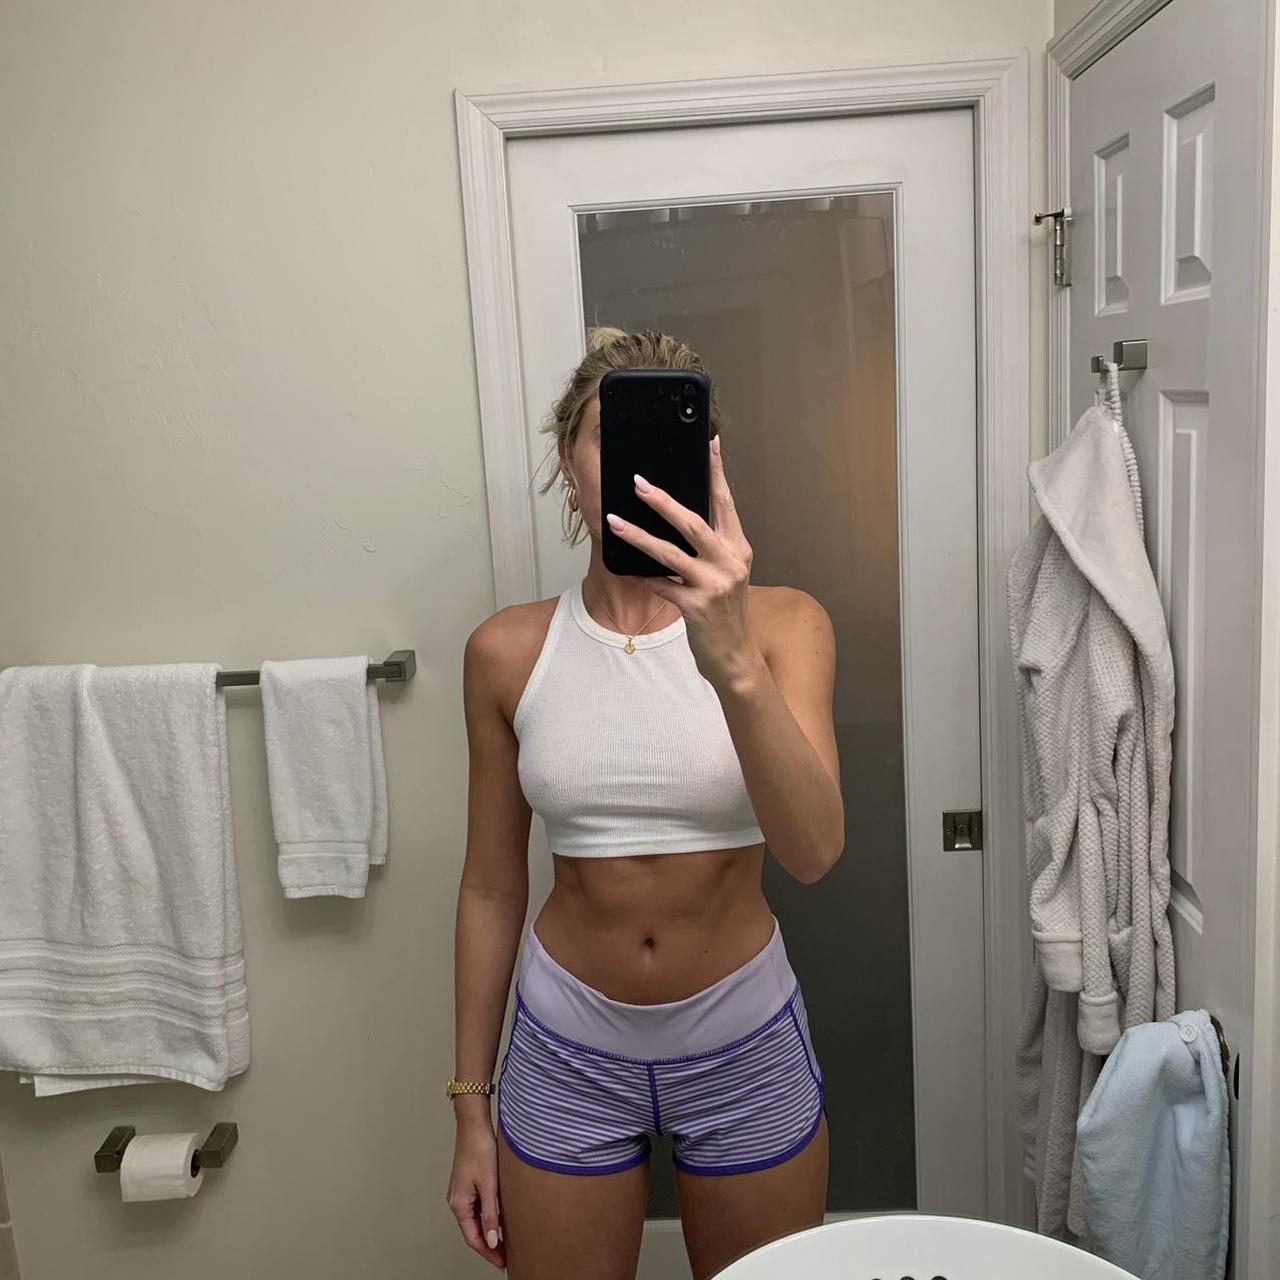 lululemon speed up low rise lined short in 2.5 and - Depop